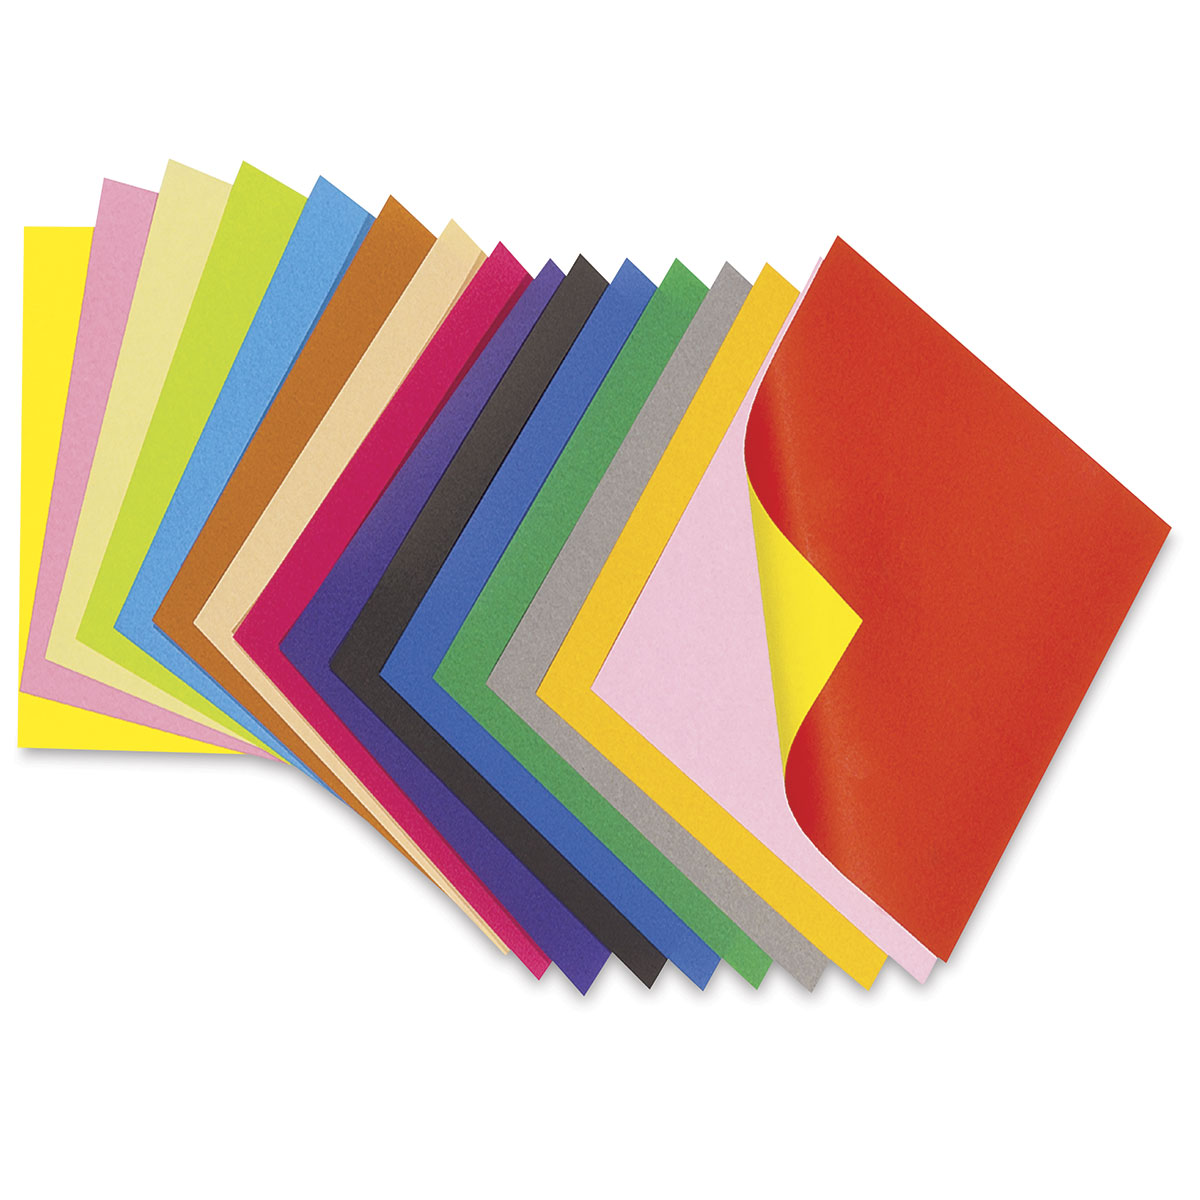 Roylco Double Sided Really Big Origami Paper, 12 x 12 in, Pack of 30